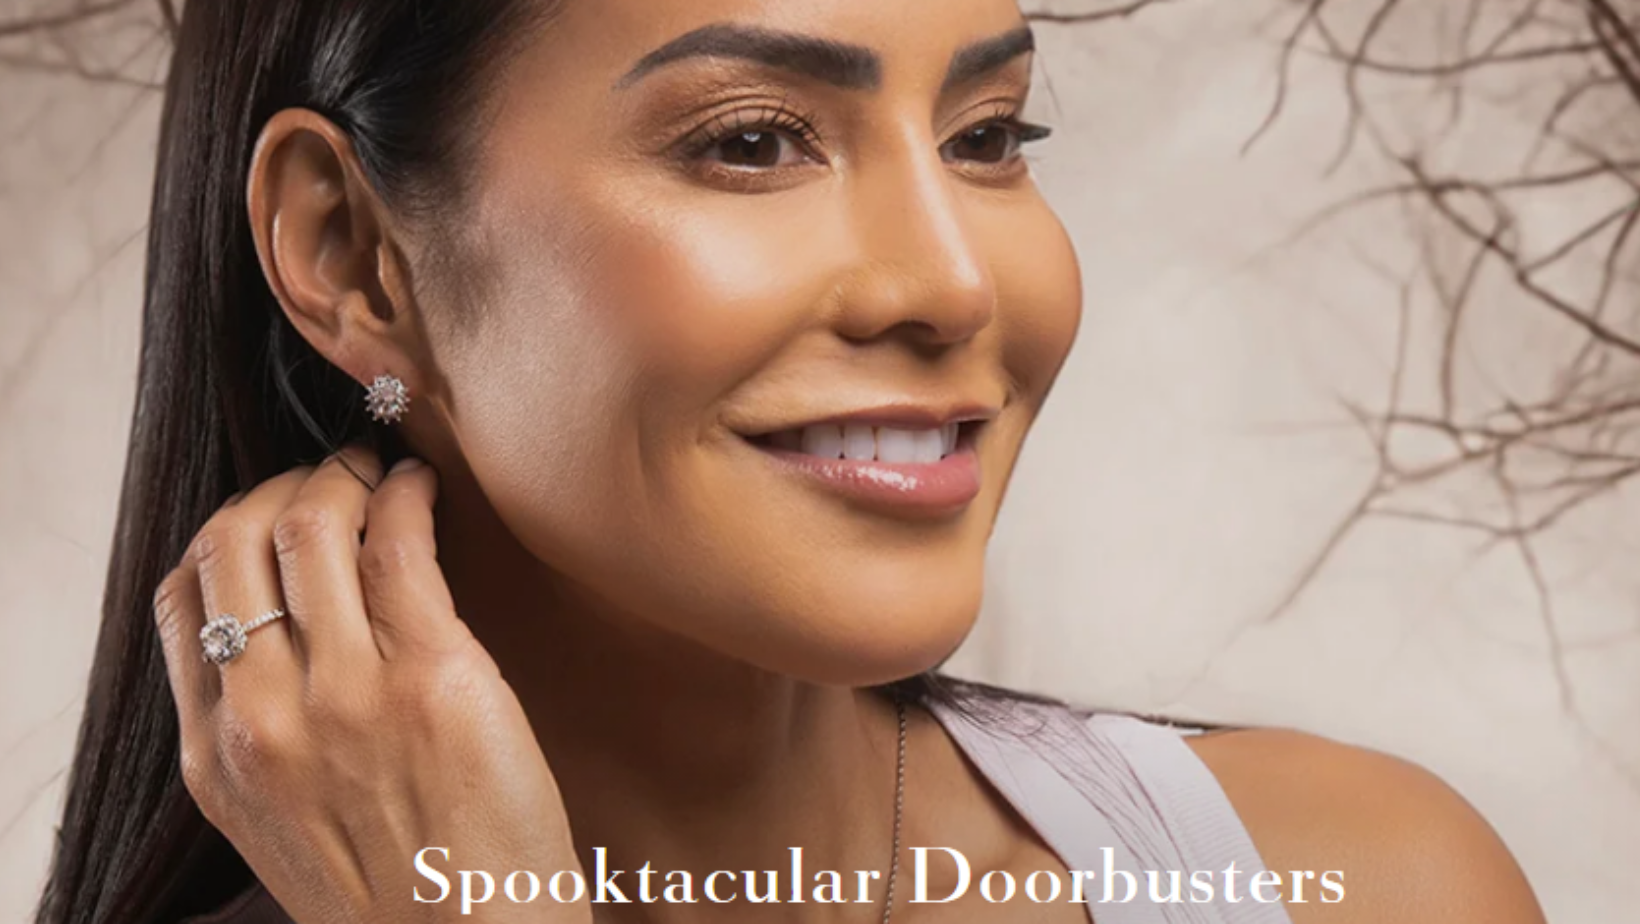 Unlock Your Style with Spooktacular Doorbusters: Cate & Chloe's Fall Fashion Favorites Revealed